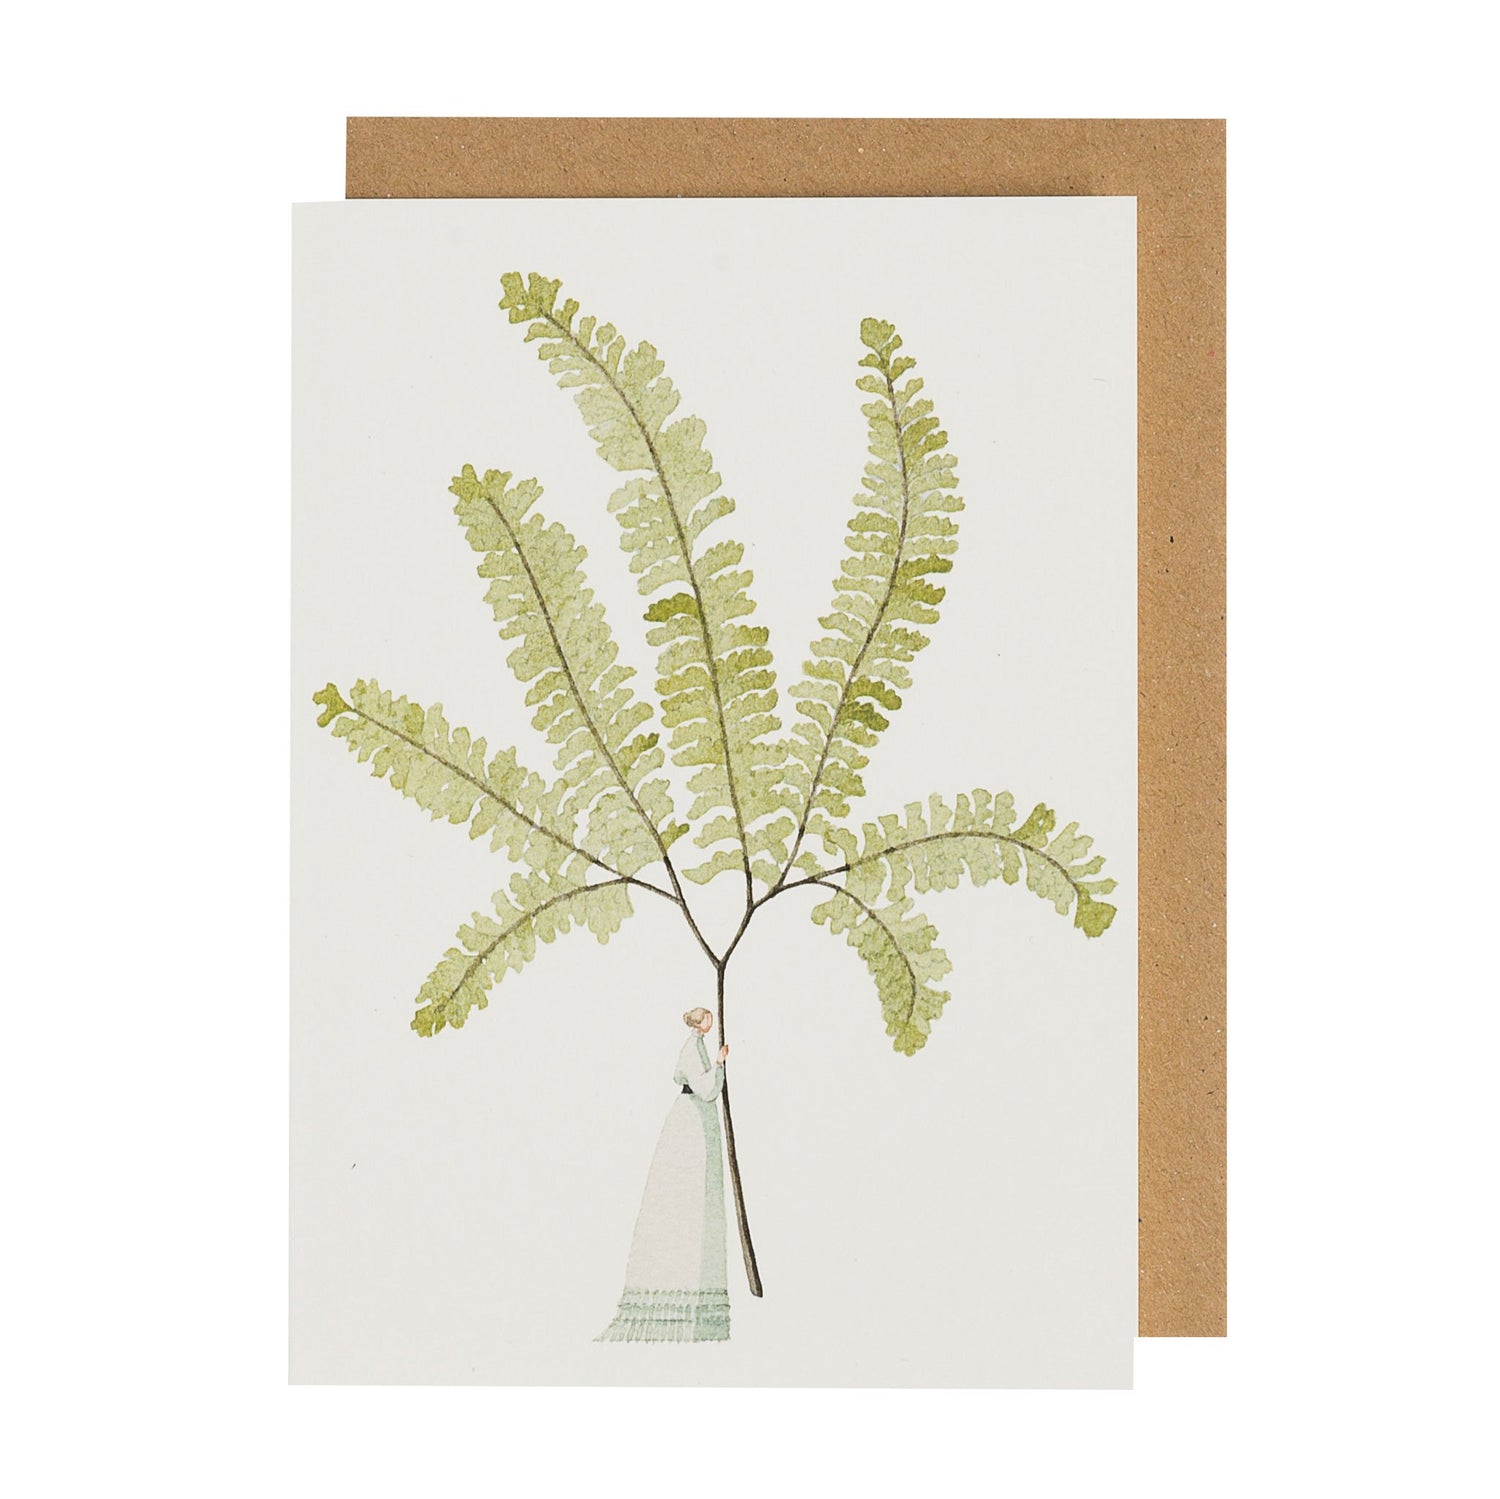 A Fabulous Ferns 4 Greeting Card with an illustration by Laura Stoddart of a woman holding a fern, made from environmentally sustainable materials by Hester &amp; Cook.